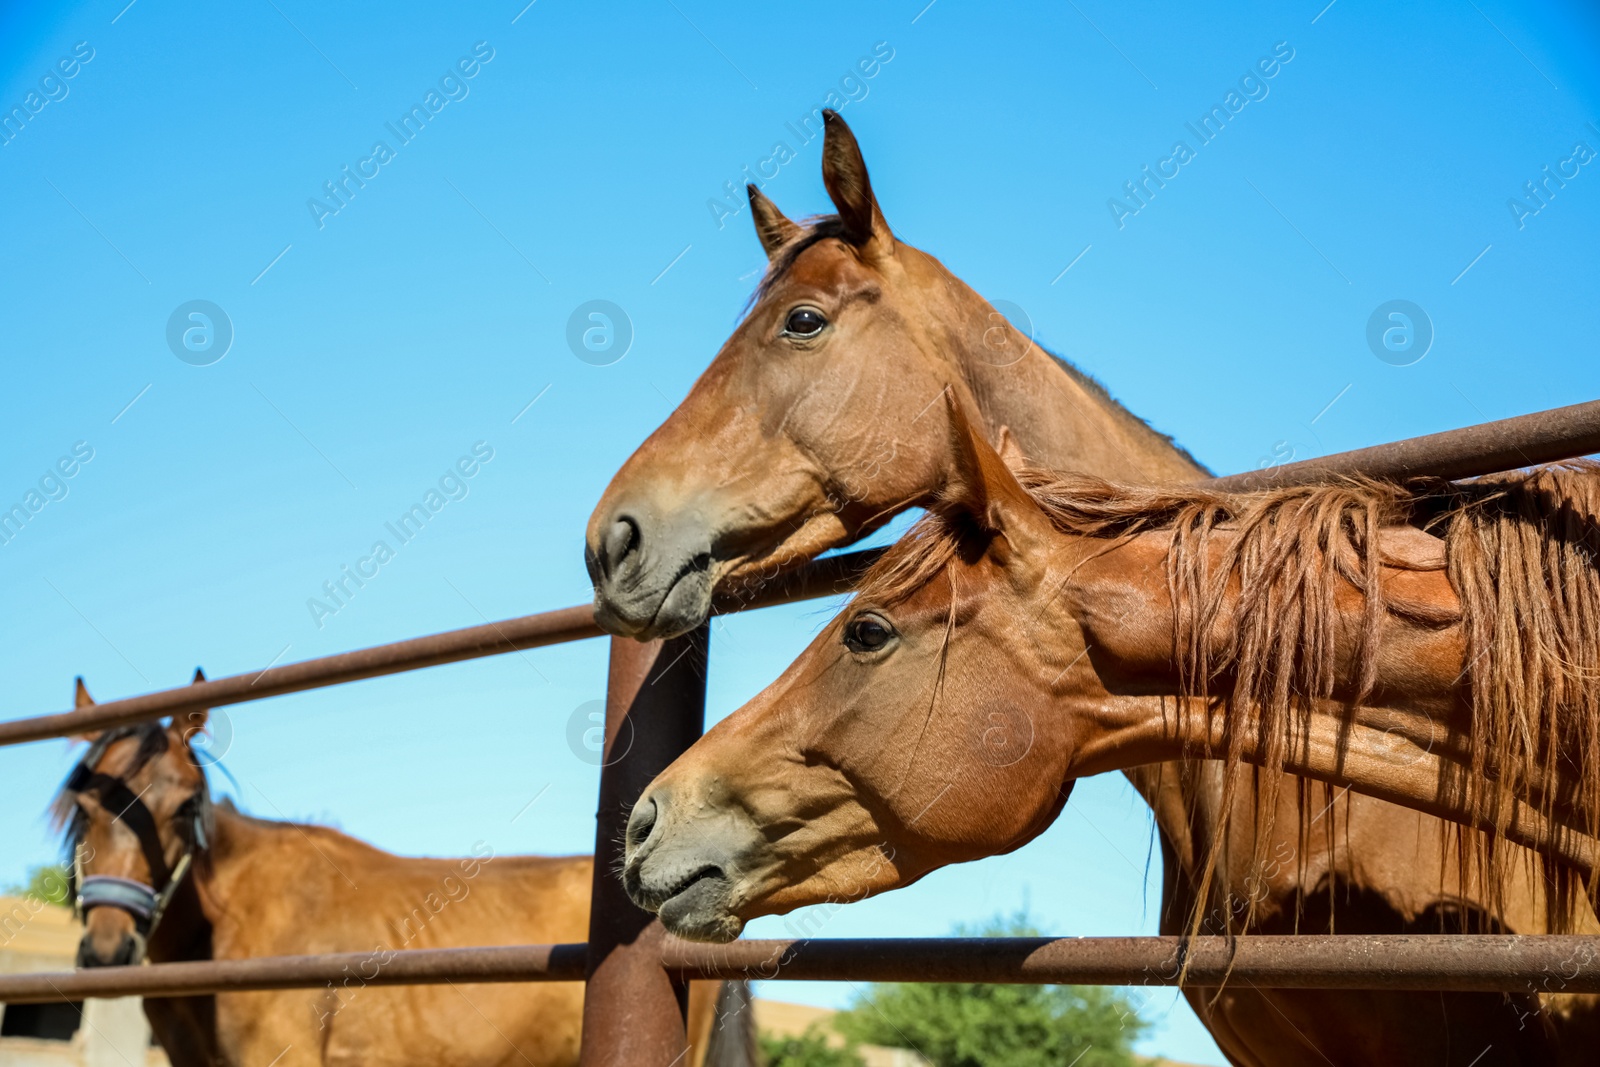 Photo of Chestnut horses at fence outdoors on sunny day. Beautiful pet